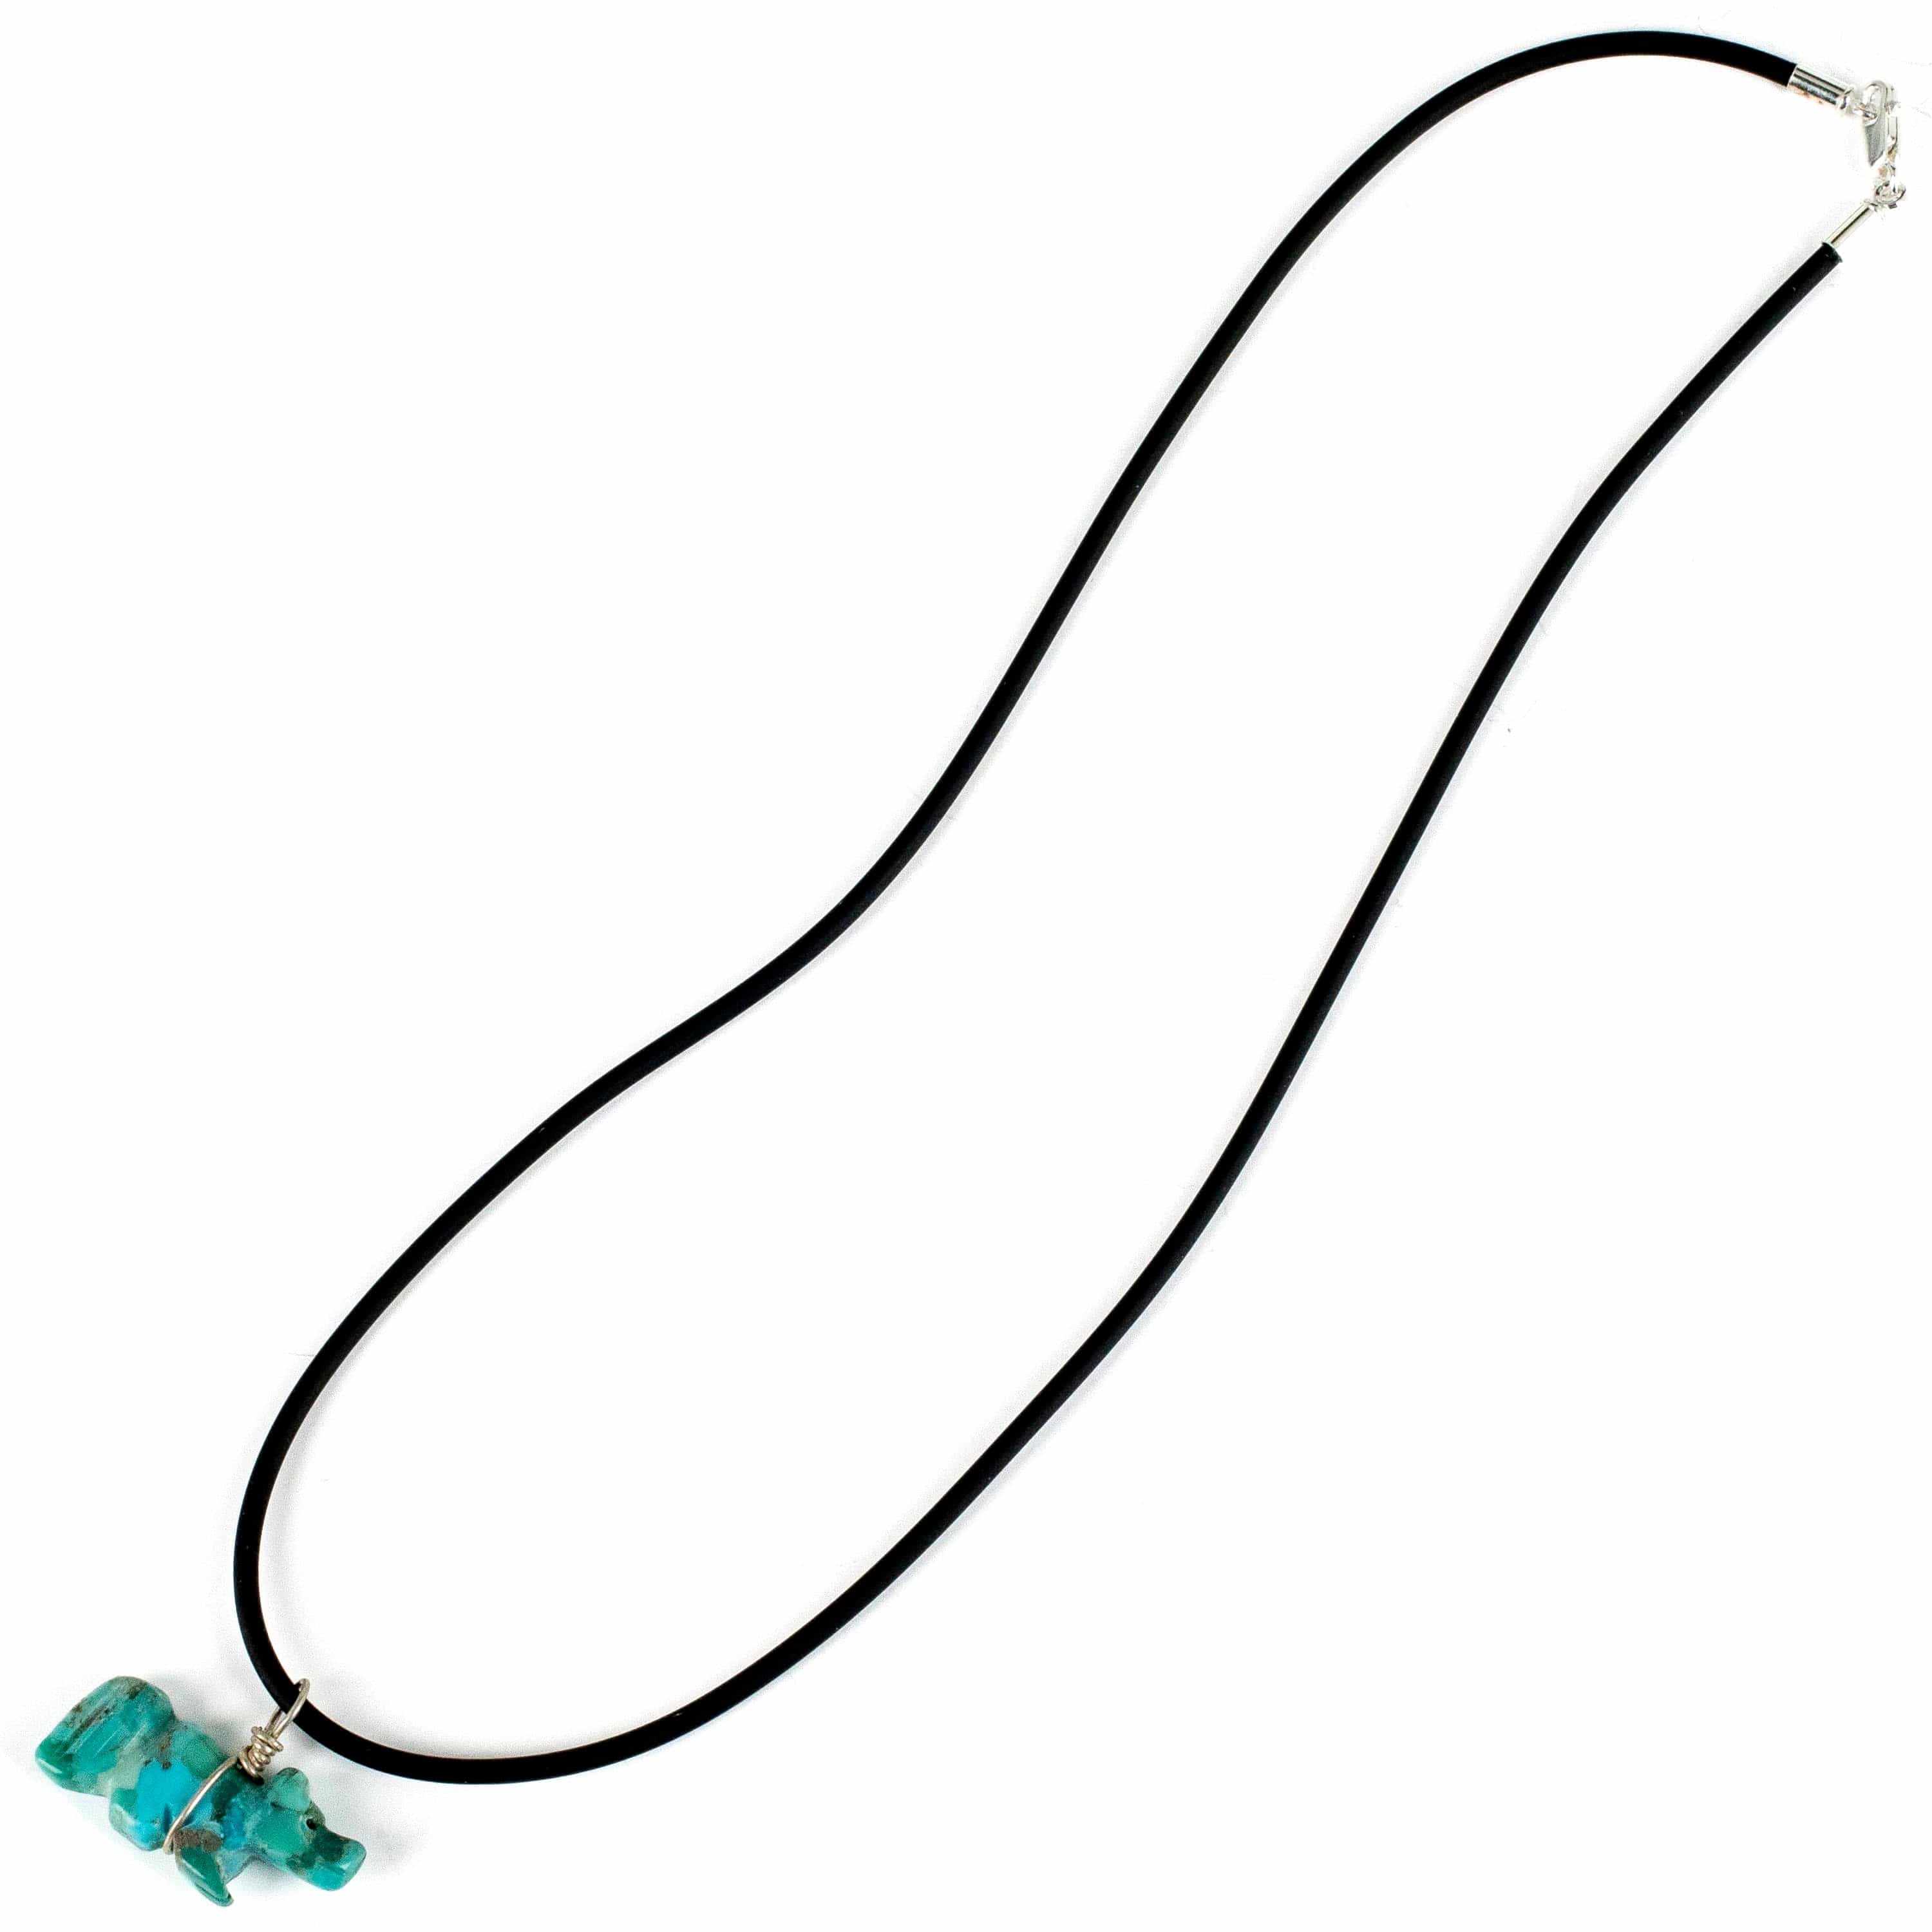 Kalifano Native American Jewelry Kingman Turquoise Fetish Carving USA Native American Made Necklace with Leather Cord NAN80.006